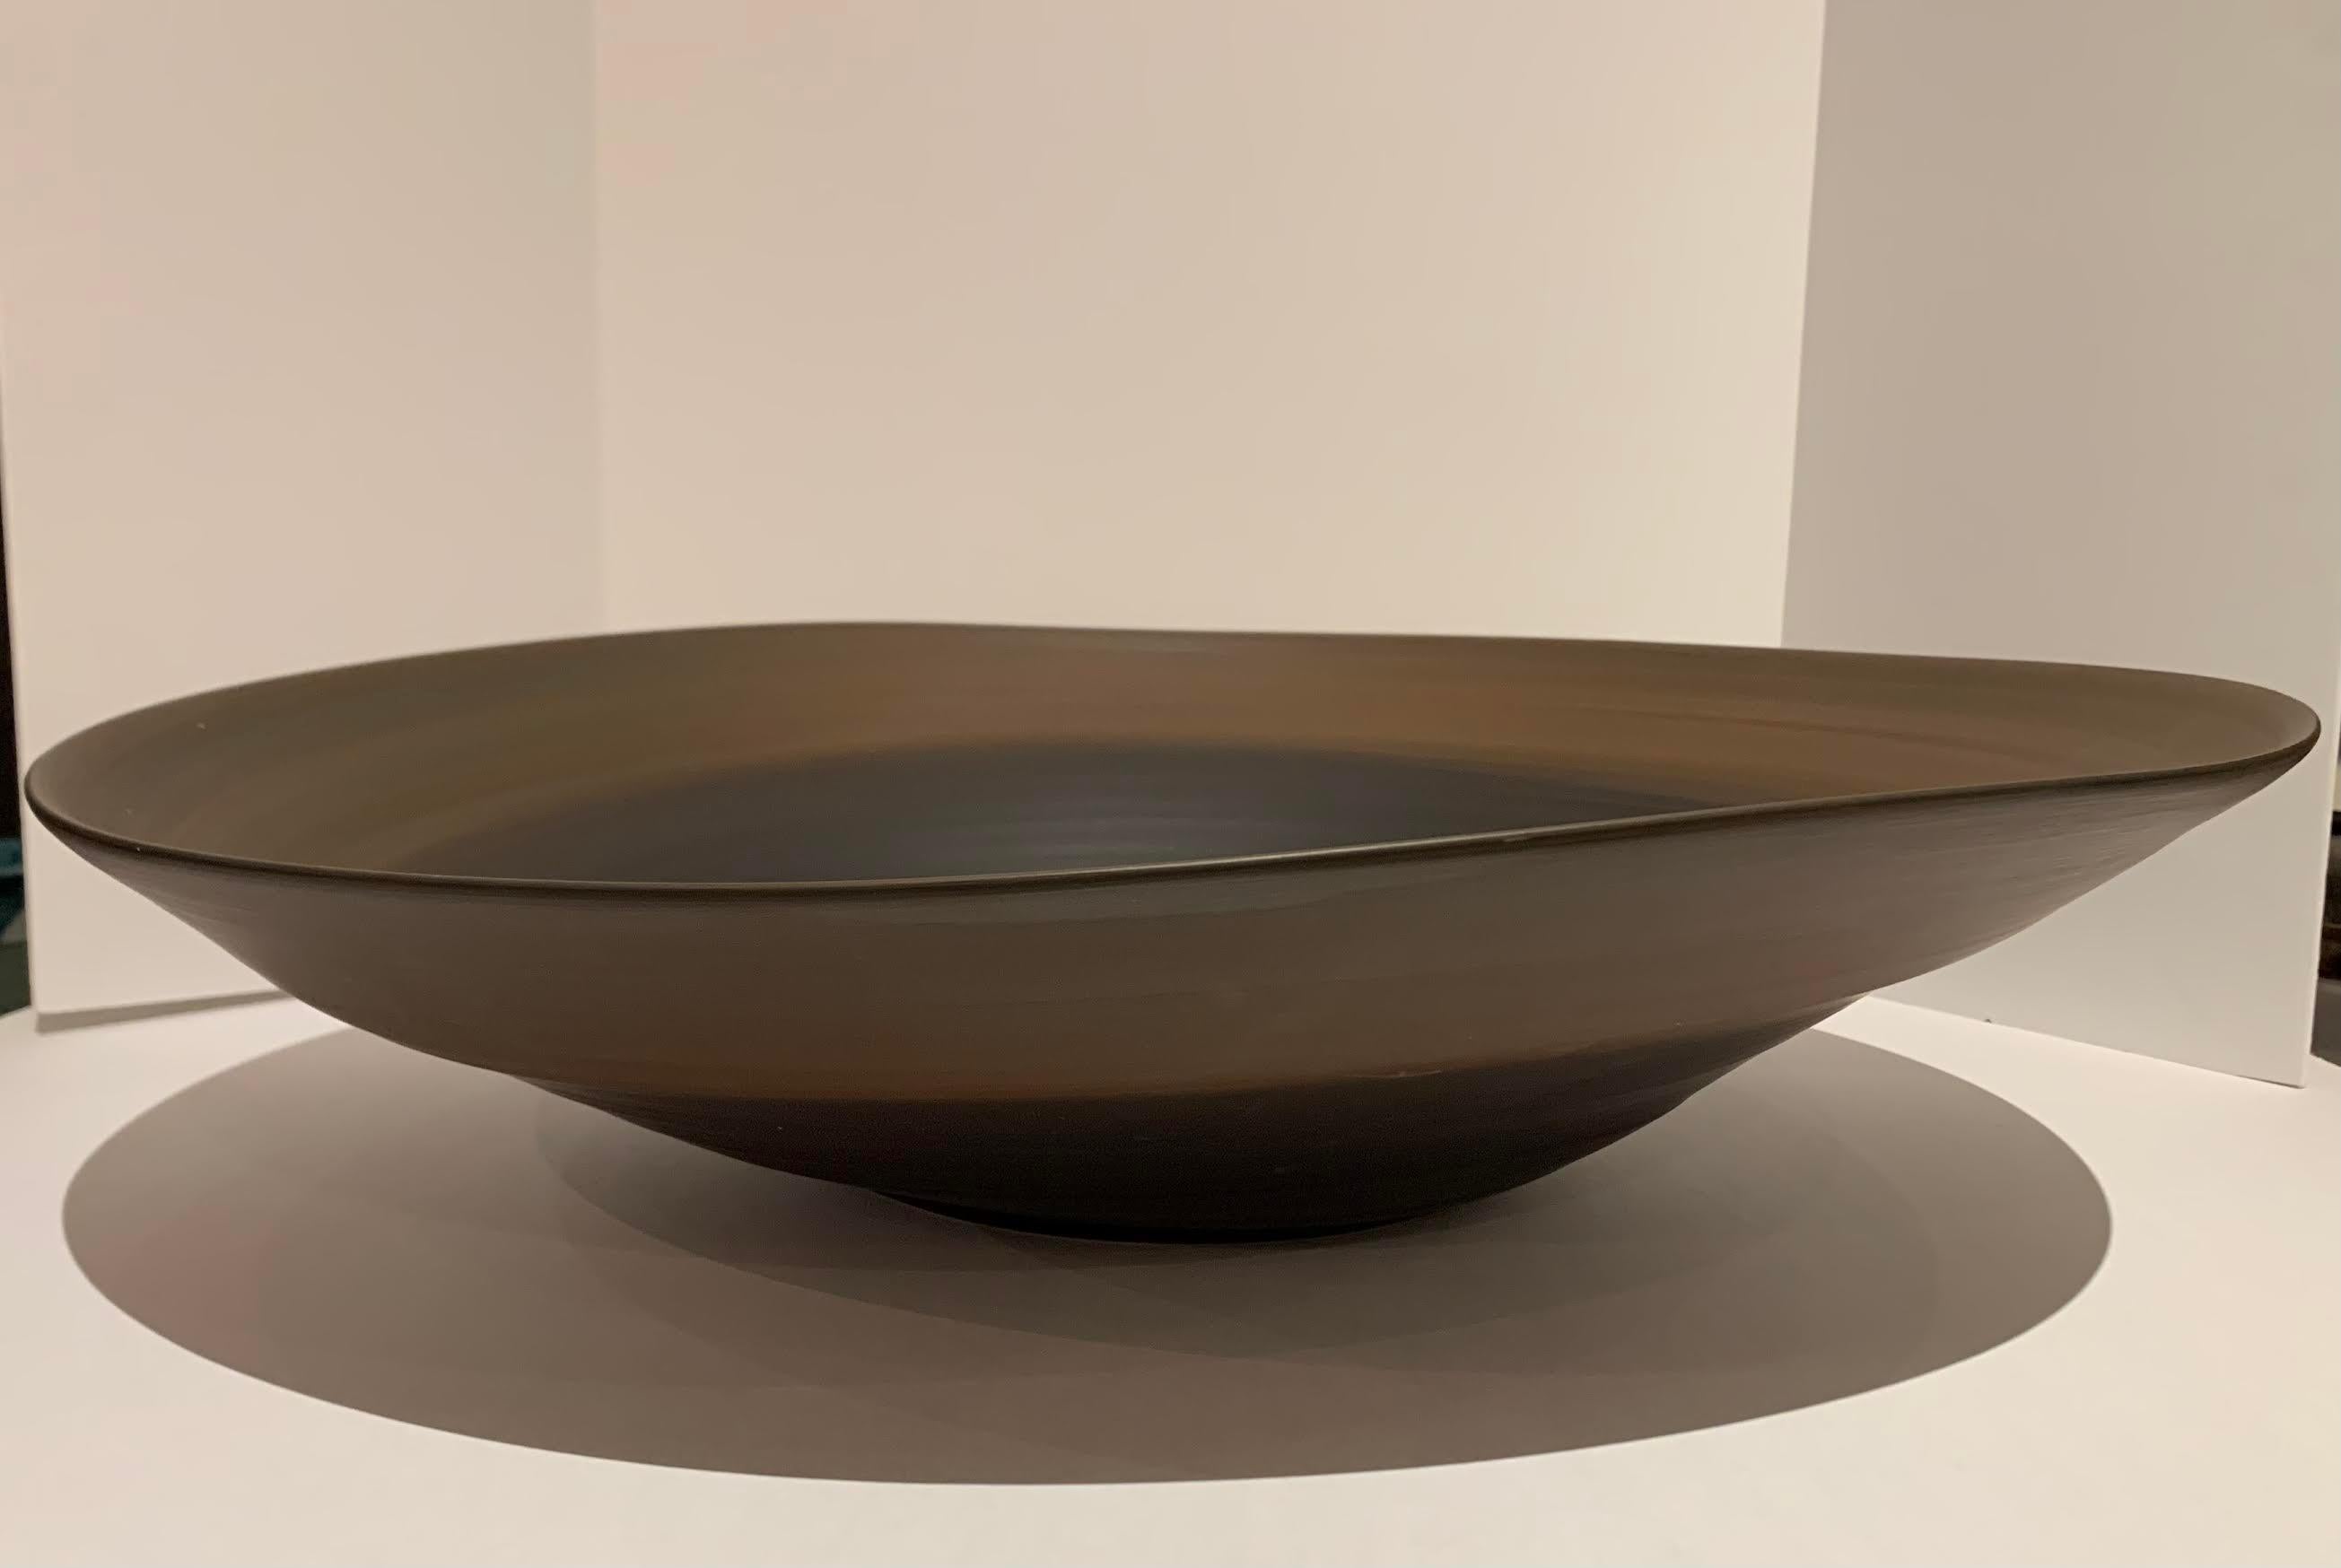 Coffee and black circular design contemporary Italian extra large fine ceramic bowl.
The black center is surrounded by a beautiful coffee color rim.
On the exterior, the black base is topped by the coffee color rim.
The bowl is handmade and has